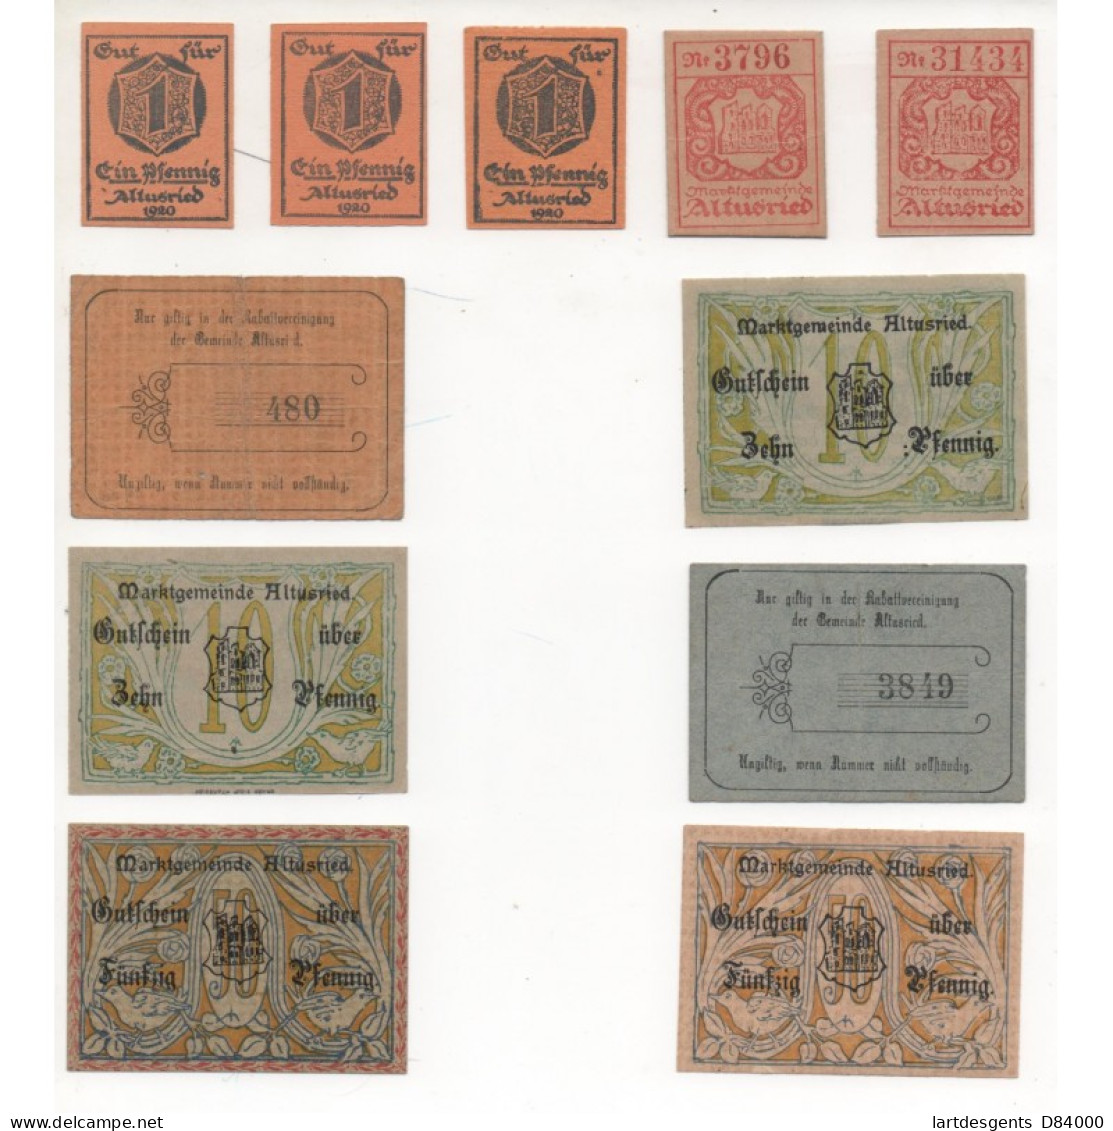 NOTGELD - ALTUSRIED - 11 Different Notes - 1918-1920 (A042) - [11] Local Banknote Issues